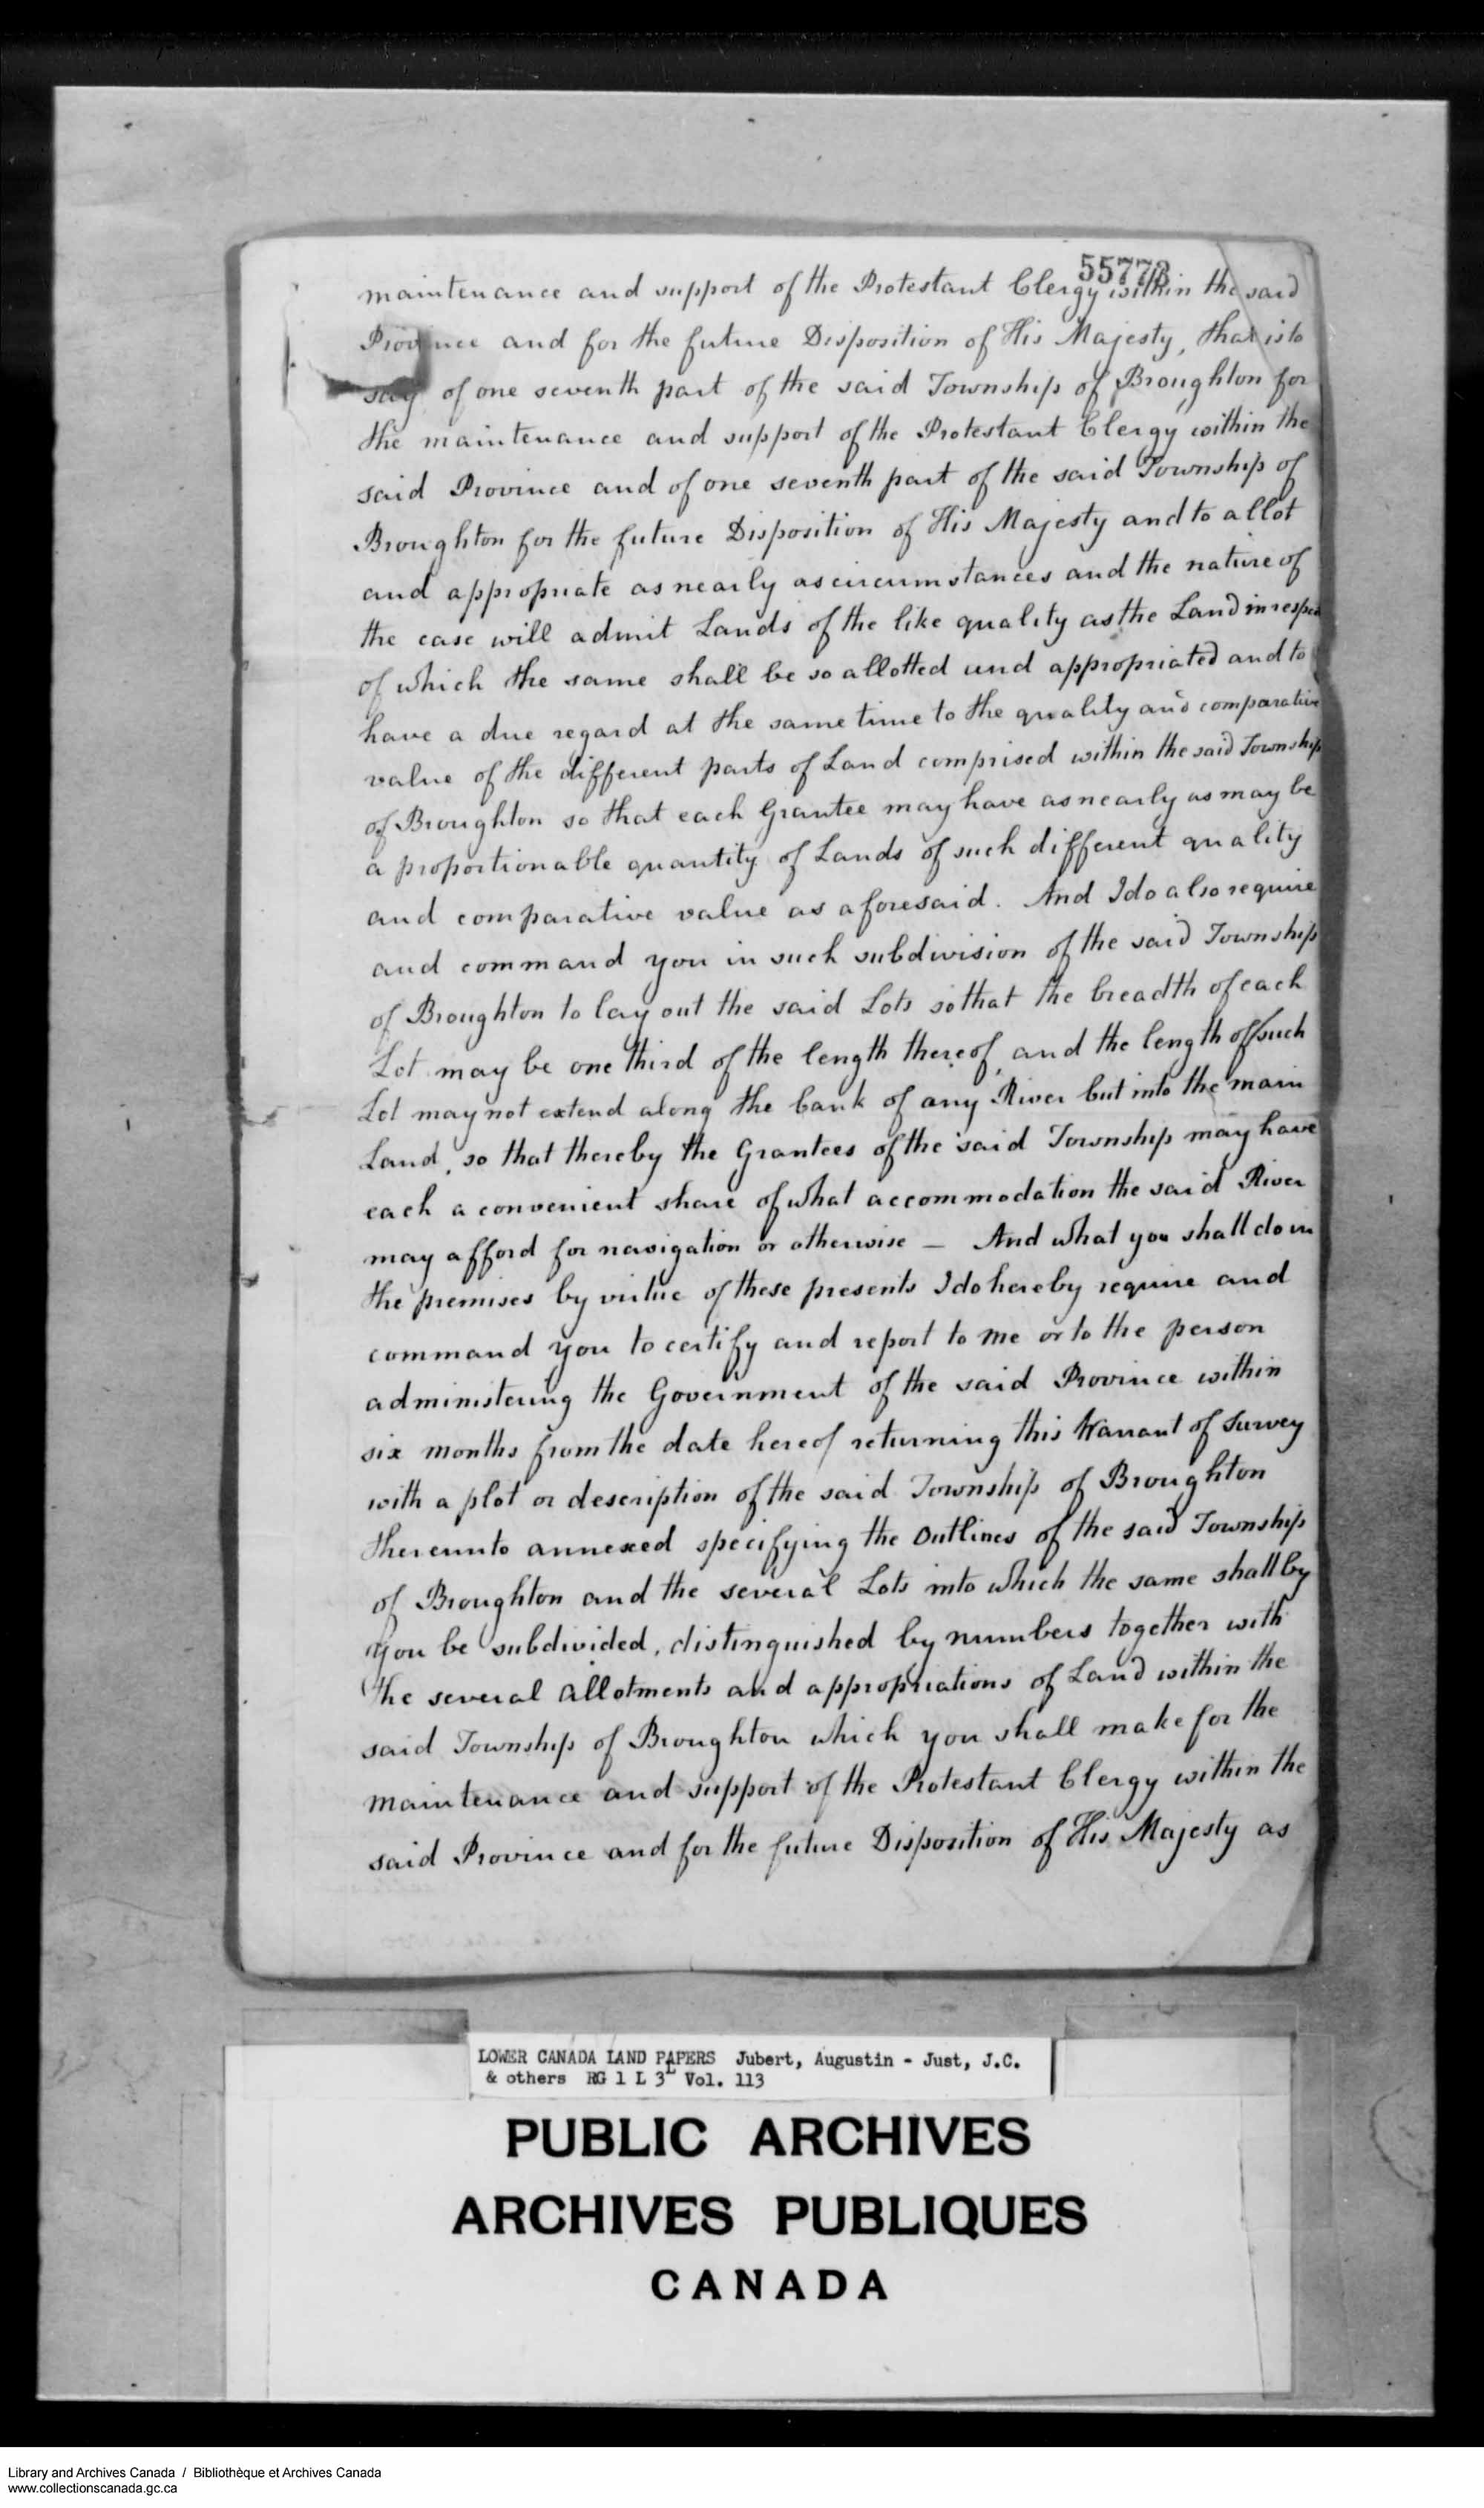 Digitized page of  for Image No.: e008700261